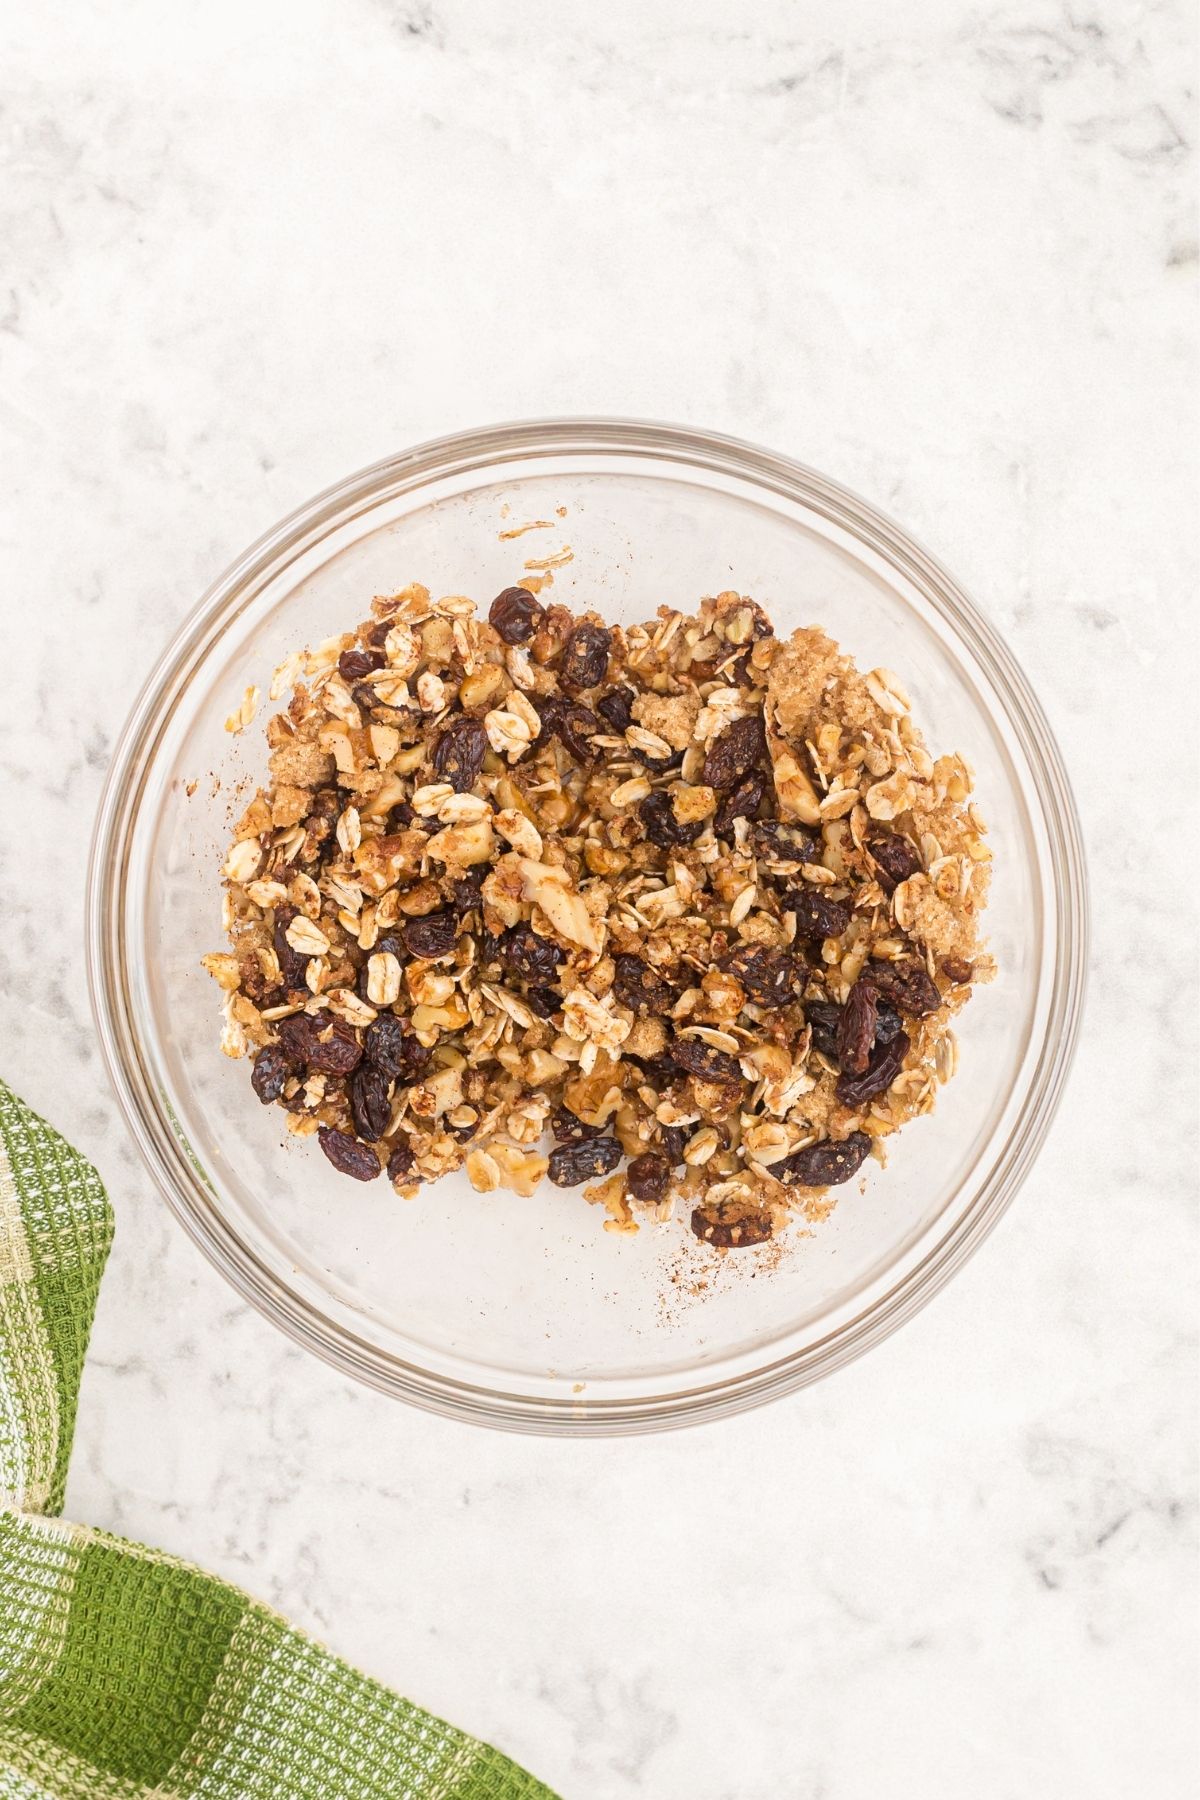 Oats mixture with nuts, raisins and brown sugar in a clear glass bowl